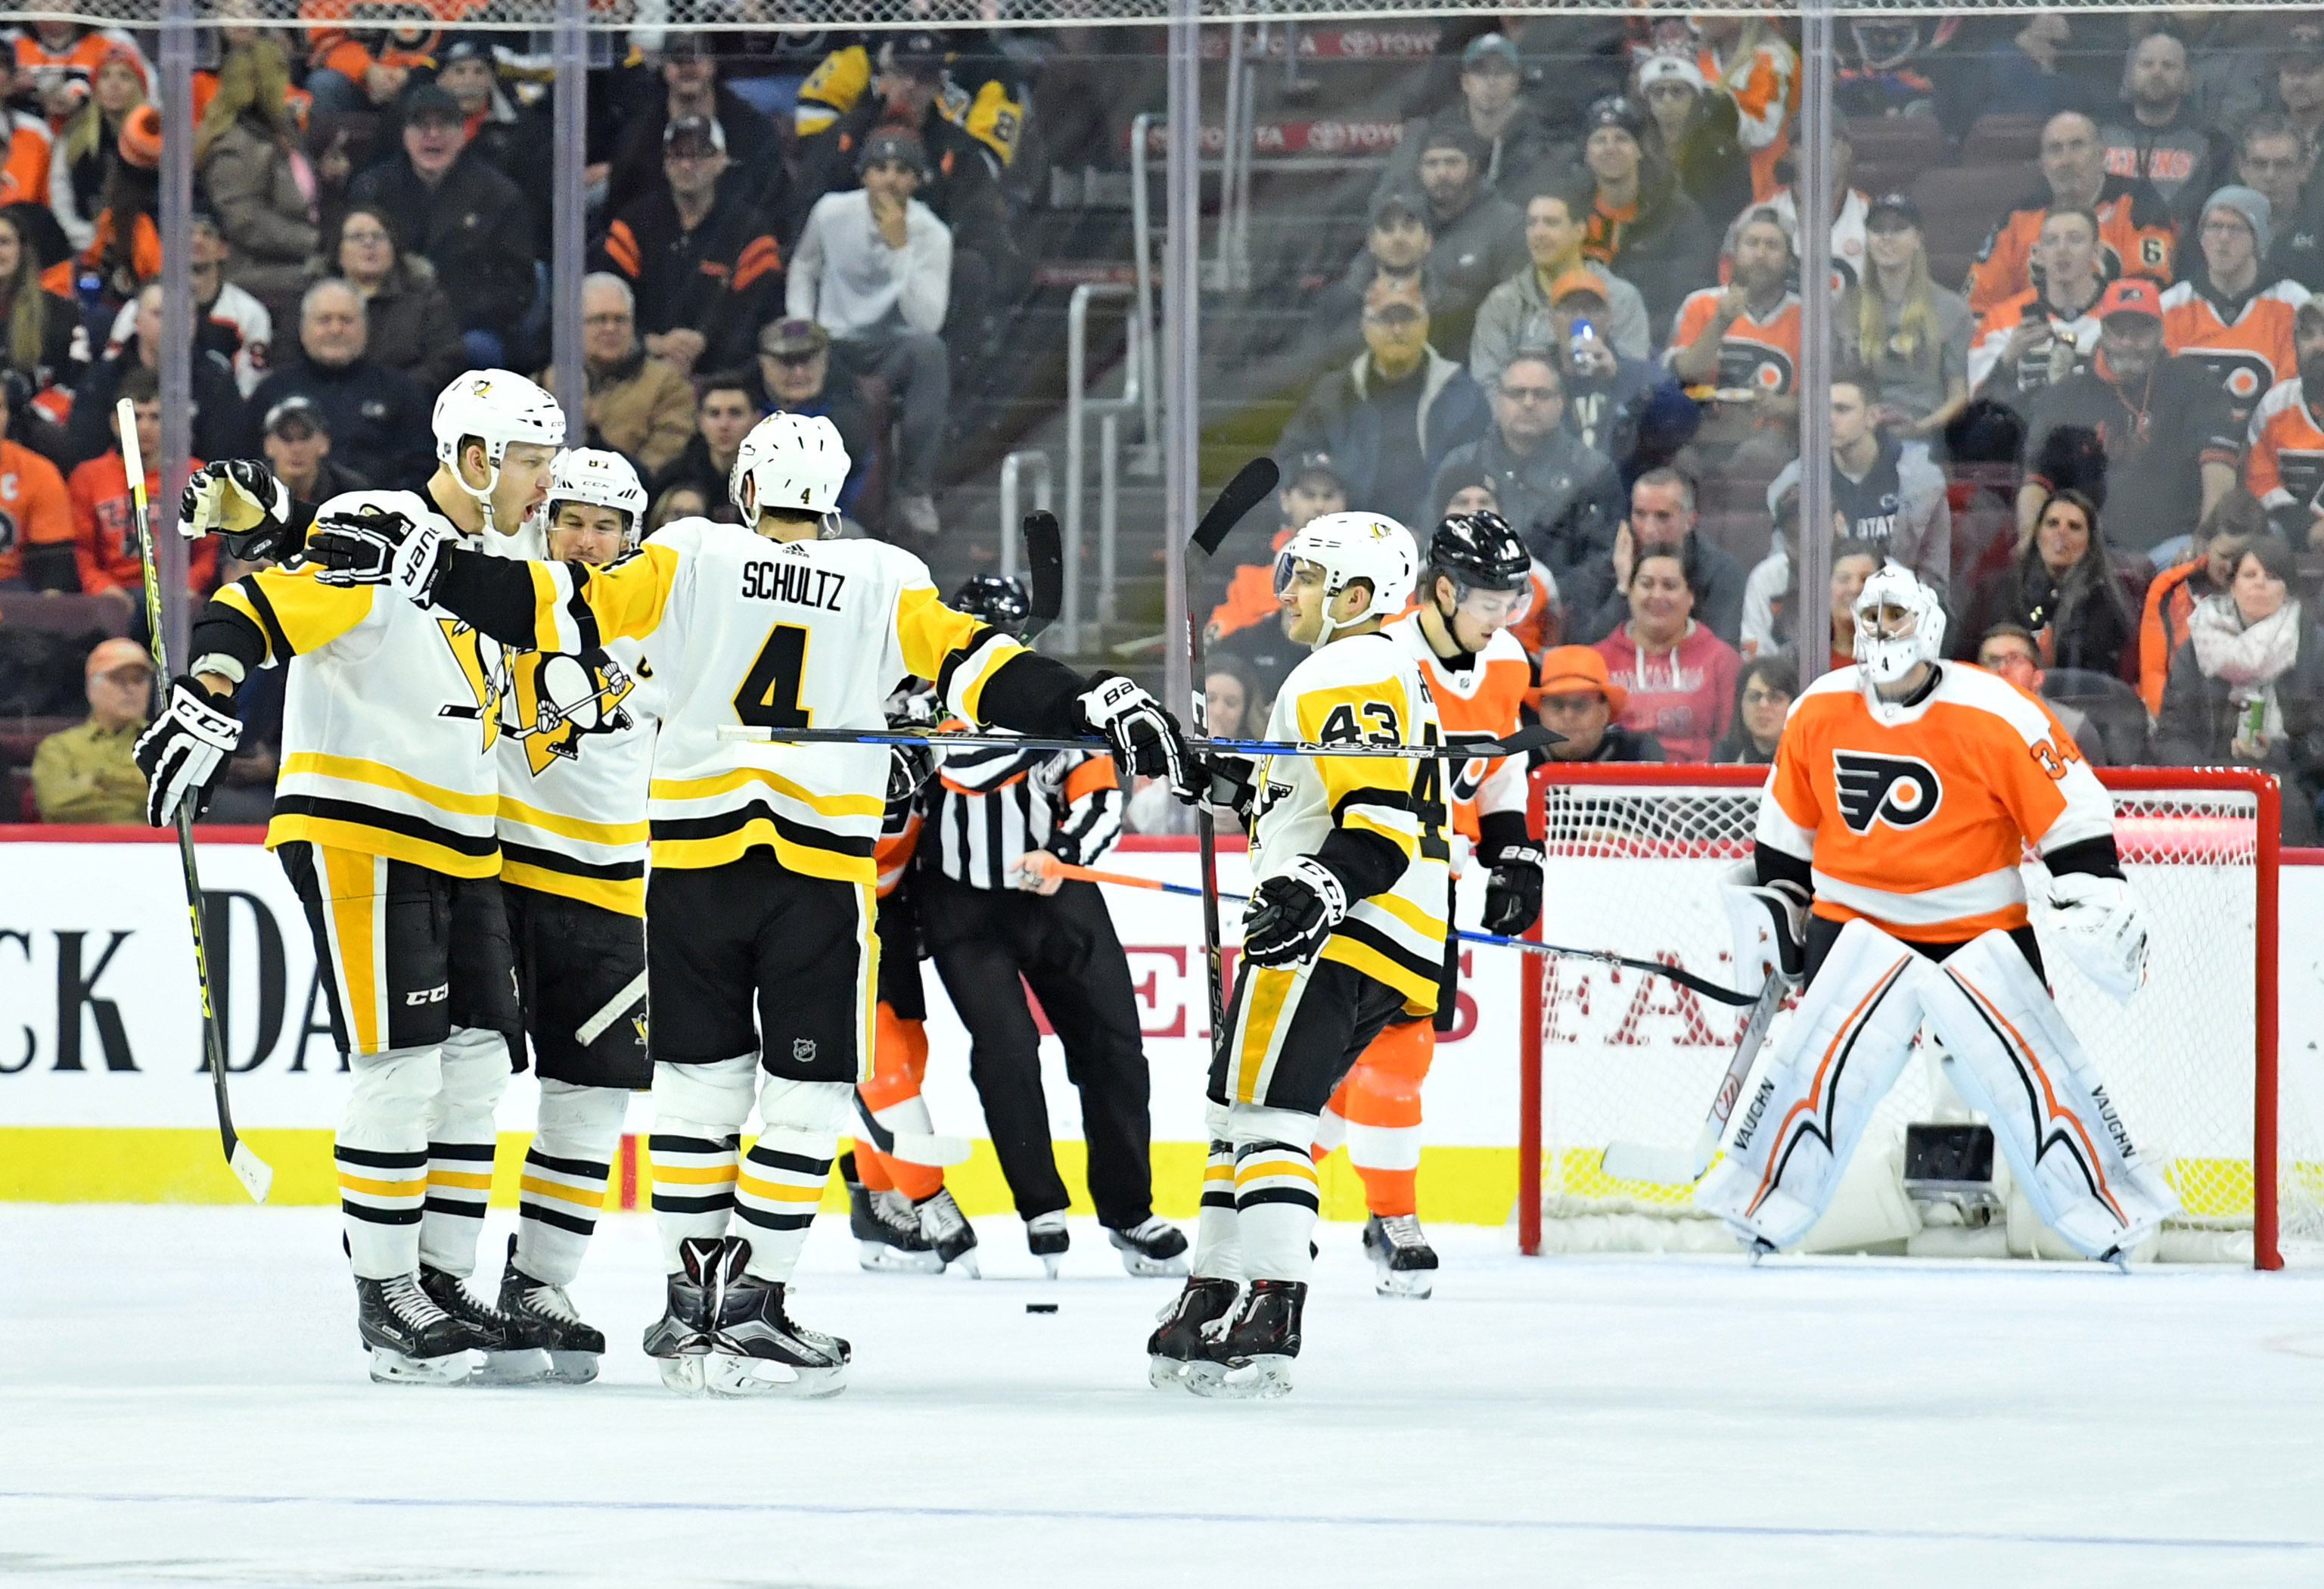 Jake Voracek’s Sobering Words About His Team Are Spot On: Thoughts after Penguins 5, Flyers 2